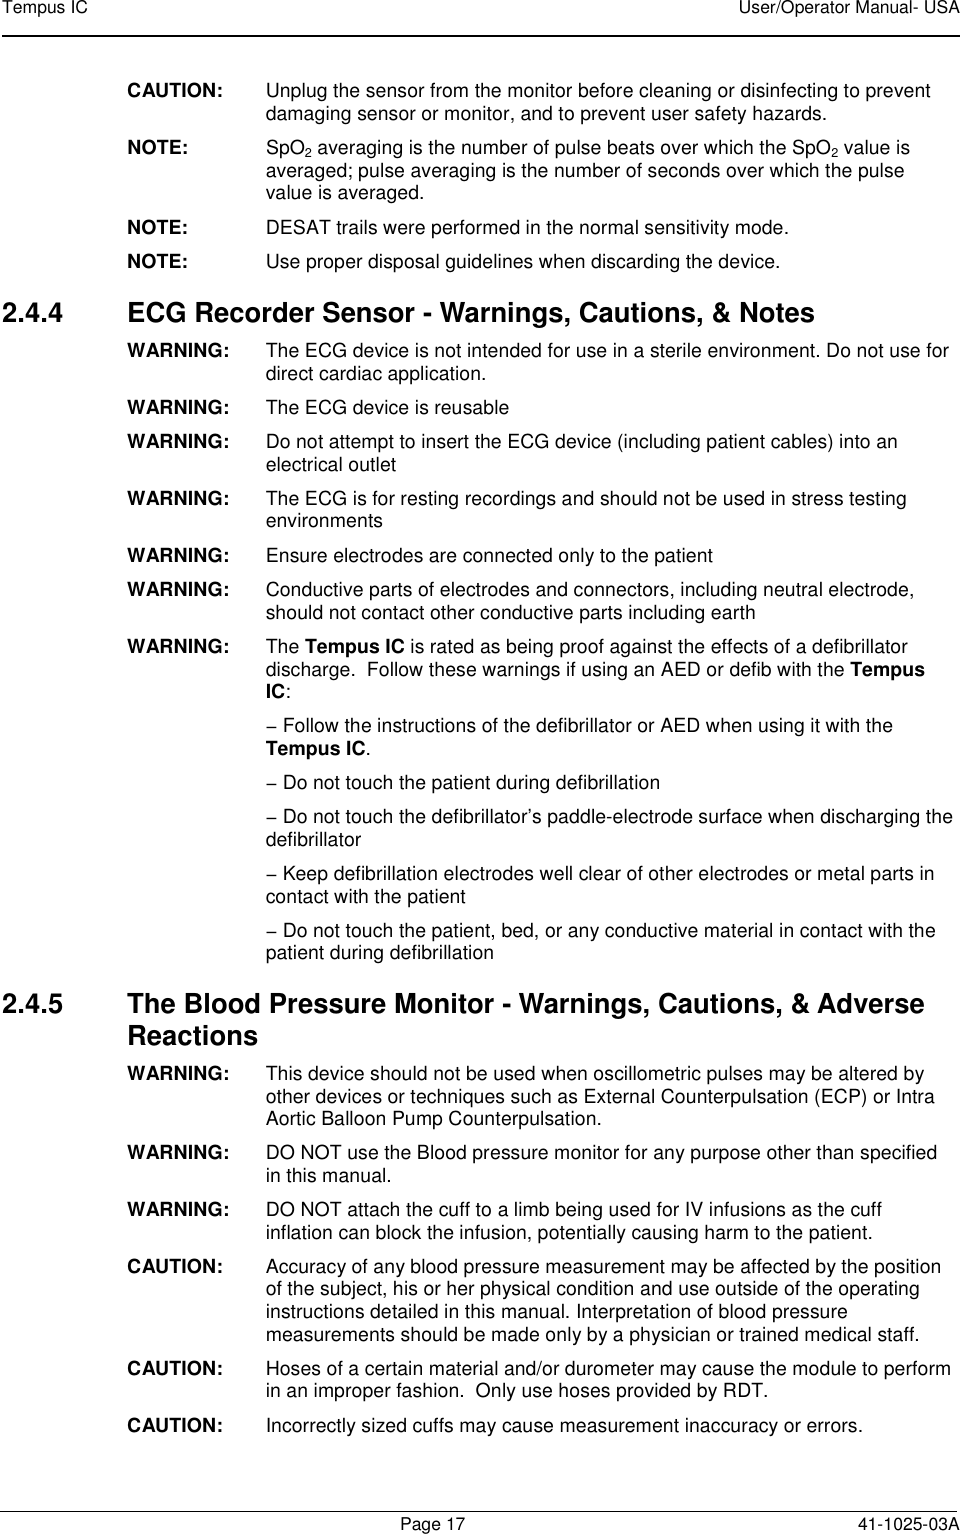 Tempus IC    User/Operator Manual- USA        Page 17  41-1025-03A CAUTION:    Unplug the sensor from the monitor before cleaning or disinfecting to prevent damaging sensor or monitor, and to prevent user safety hazards. NOTE:    SpO2 averaging is the number of pulse beats over which the SpO2 value is averaged; pulse averaging is the number of seconds over which the pulse value is averaged. NOTE:    DESAT trails were performed in the normal sensitivity mode. NOTE:    Use proper disposal guidelines when discarding the device. 2.4.4  ECG Recorder Sensor - Warnings, Cautions, &amp; Notes WARNING:   The ECG device is not intended for use in a sterile environment. Do not use for direct cardiac application.  WARNING:   The ECG device is reusable  WARNING:   Do not attempt to insert the ECG device (including patient cables) into an electrical outlet  WARNING:   The ECG is for resting recordings and should not be used in stress testing environments  WARNING:   Ensure electrodes are connected only to the patient  WARNING:   Conductive parts of electrodes and connectors, including neutral electrode, should not contact other conductive parts including earth  WARNING:   The Tempus IC is rated as being proof against the effects of a defibrillator discharge.  Follow these warnings if using an AED or defib with the Tempus IC:  − Follow the instructions of the defibrillator or AED when using it with the Tempus IC.   − Do not touch the patient during defibrillation  − Do not touch the defibrillator’s paddle-electrode surface when discharging the defibrillator  − Keep defibrillation electrodes well clear of other electrodes or metal parts in contact with the patient  − Do not touch the patient, bed, or any conductive material in contact with the patient during defibrillation  2.4.5  The Blood Pressure Monitor - Warnings, Cautions, &amp; Adverse Reactions WARNING:   This device should not be used when oscillometric pulses may be altered by other devices or techniques such as External Counterpulsation (ECP) or Intra Aortic Balloon Pump Counterpulsation. WARNING:   DO NOT use the Blood pressure monitor for any purpose other than specified in this manual.  WARNING:   DO NOT attach the cuff to a limb being used for IV infusions as the cuff inflation can block the infusion, potentially causing harm to the patient. CAUTION:  Accuracy of any blood pressure measurement may be affected by the position of the subject, his or her physical condition and use outside of the operating instructions detailed in this manual. Interpretation of blood pressure measurements should be made only by a physician or trained medical staff. CAUTION:  Hoses of a certain material and/or durometer may cause the module to perform in an improper fashion.  Only use hoses provided by RDT. CAUTION:  Incorrectly sized cuffs may cause measurement inaccuracy or errors. 